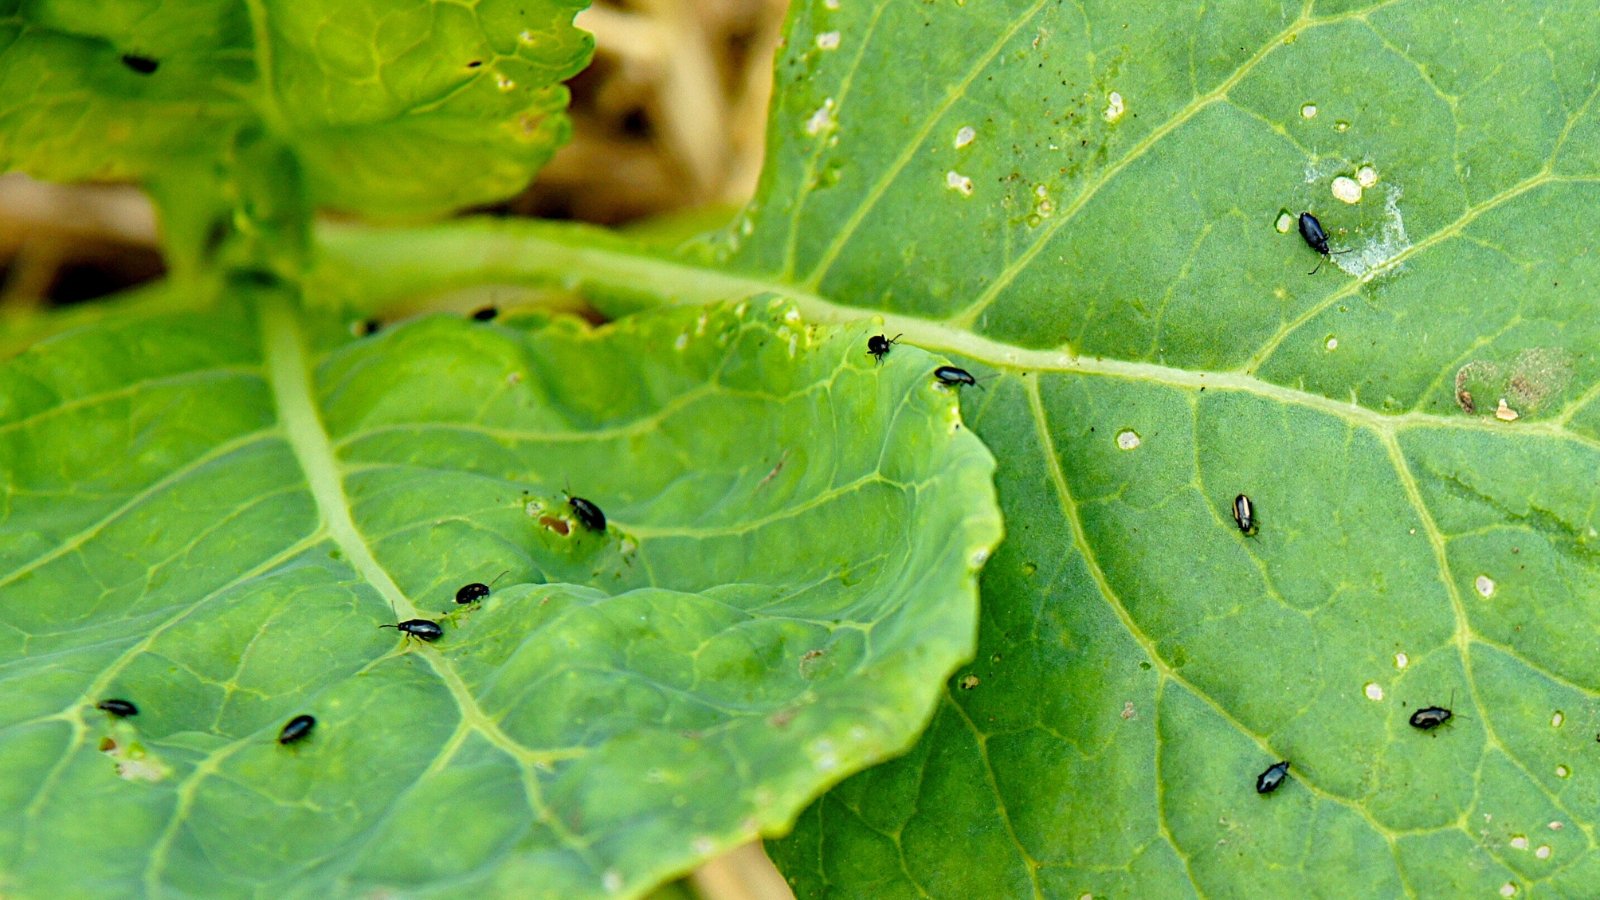 Close-up of large and wide cabbage leaves infected with tiny, black, shiny insects with elongated bodies called flea beetles.